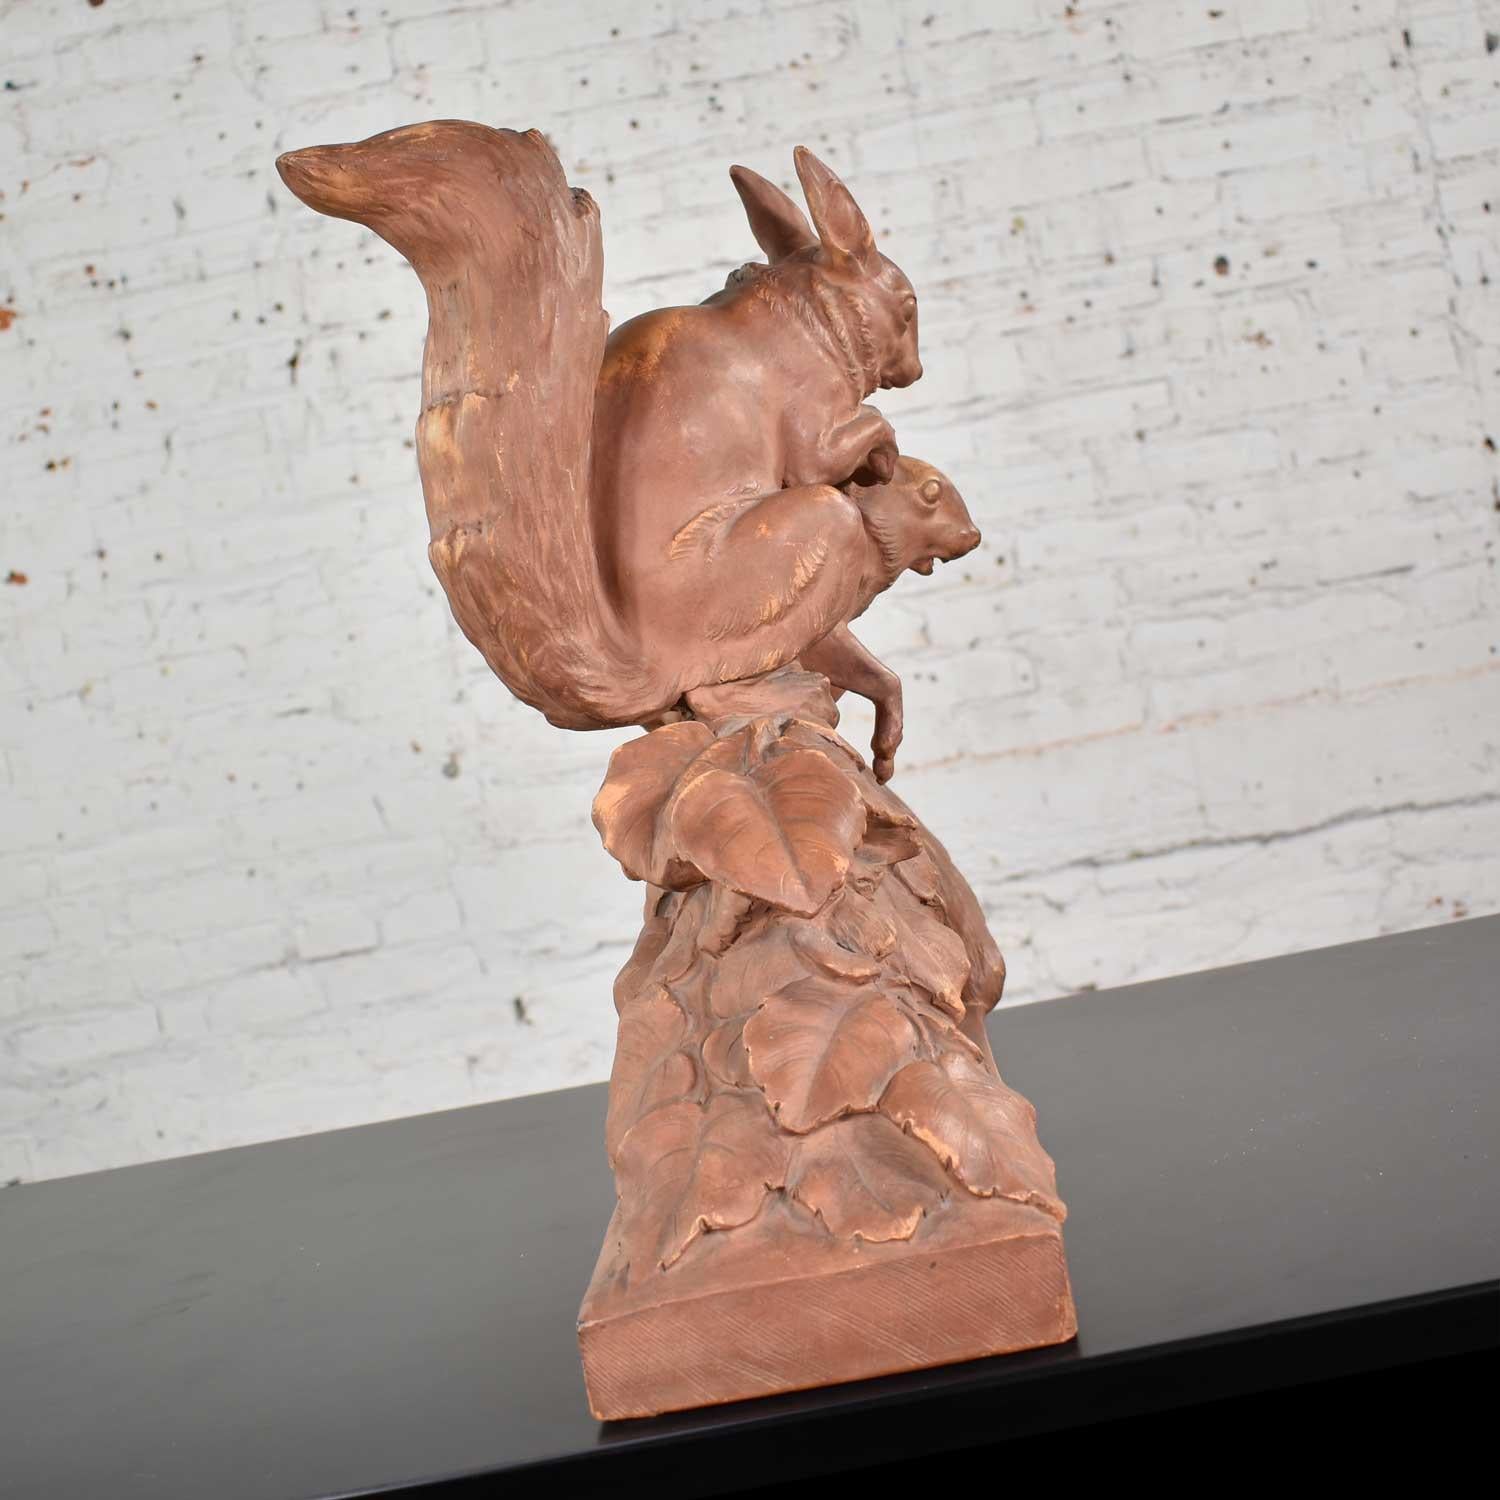 Terracotta Life-Size Squirrel Sculpture by Leo Amaury & Stamped R D’Arly France In Good Condition For Sale In Topeka, KS